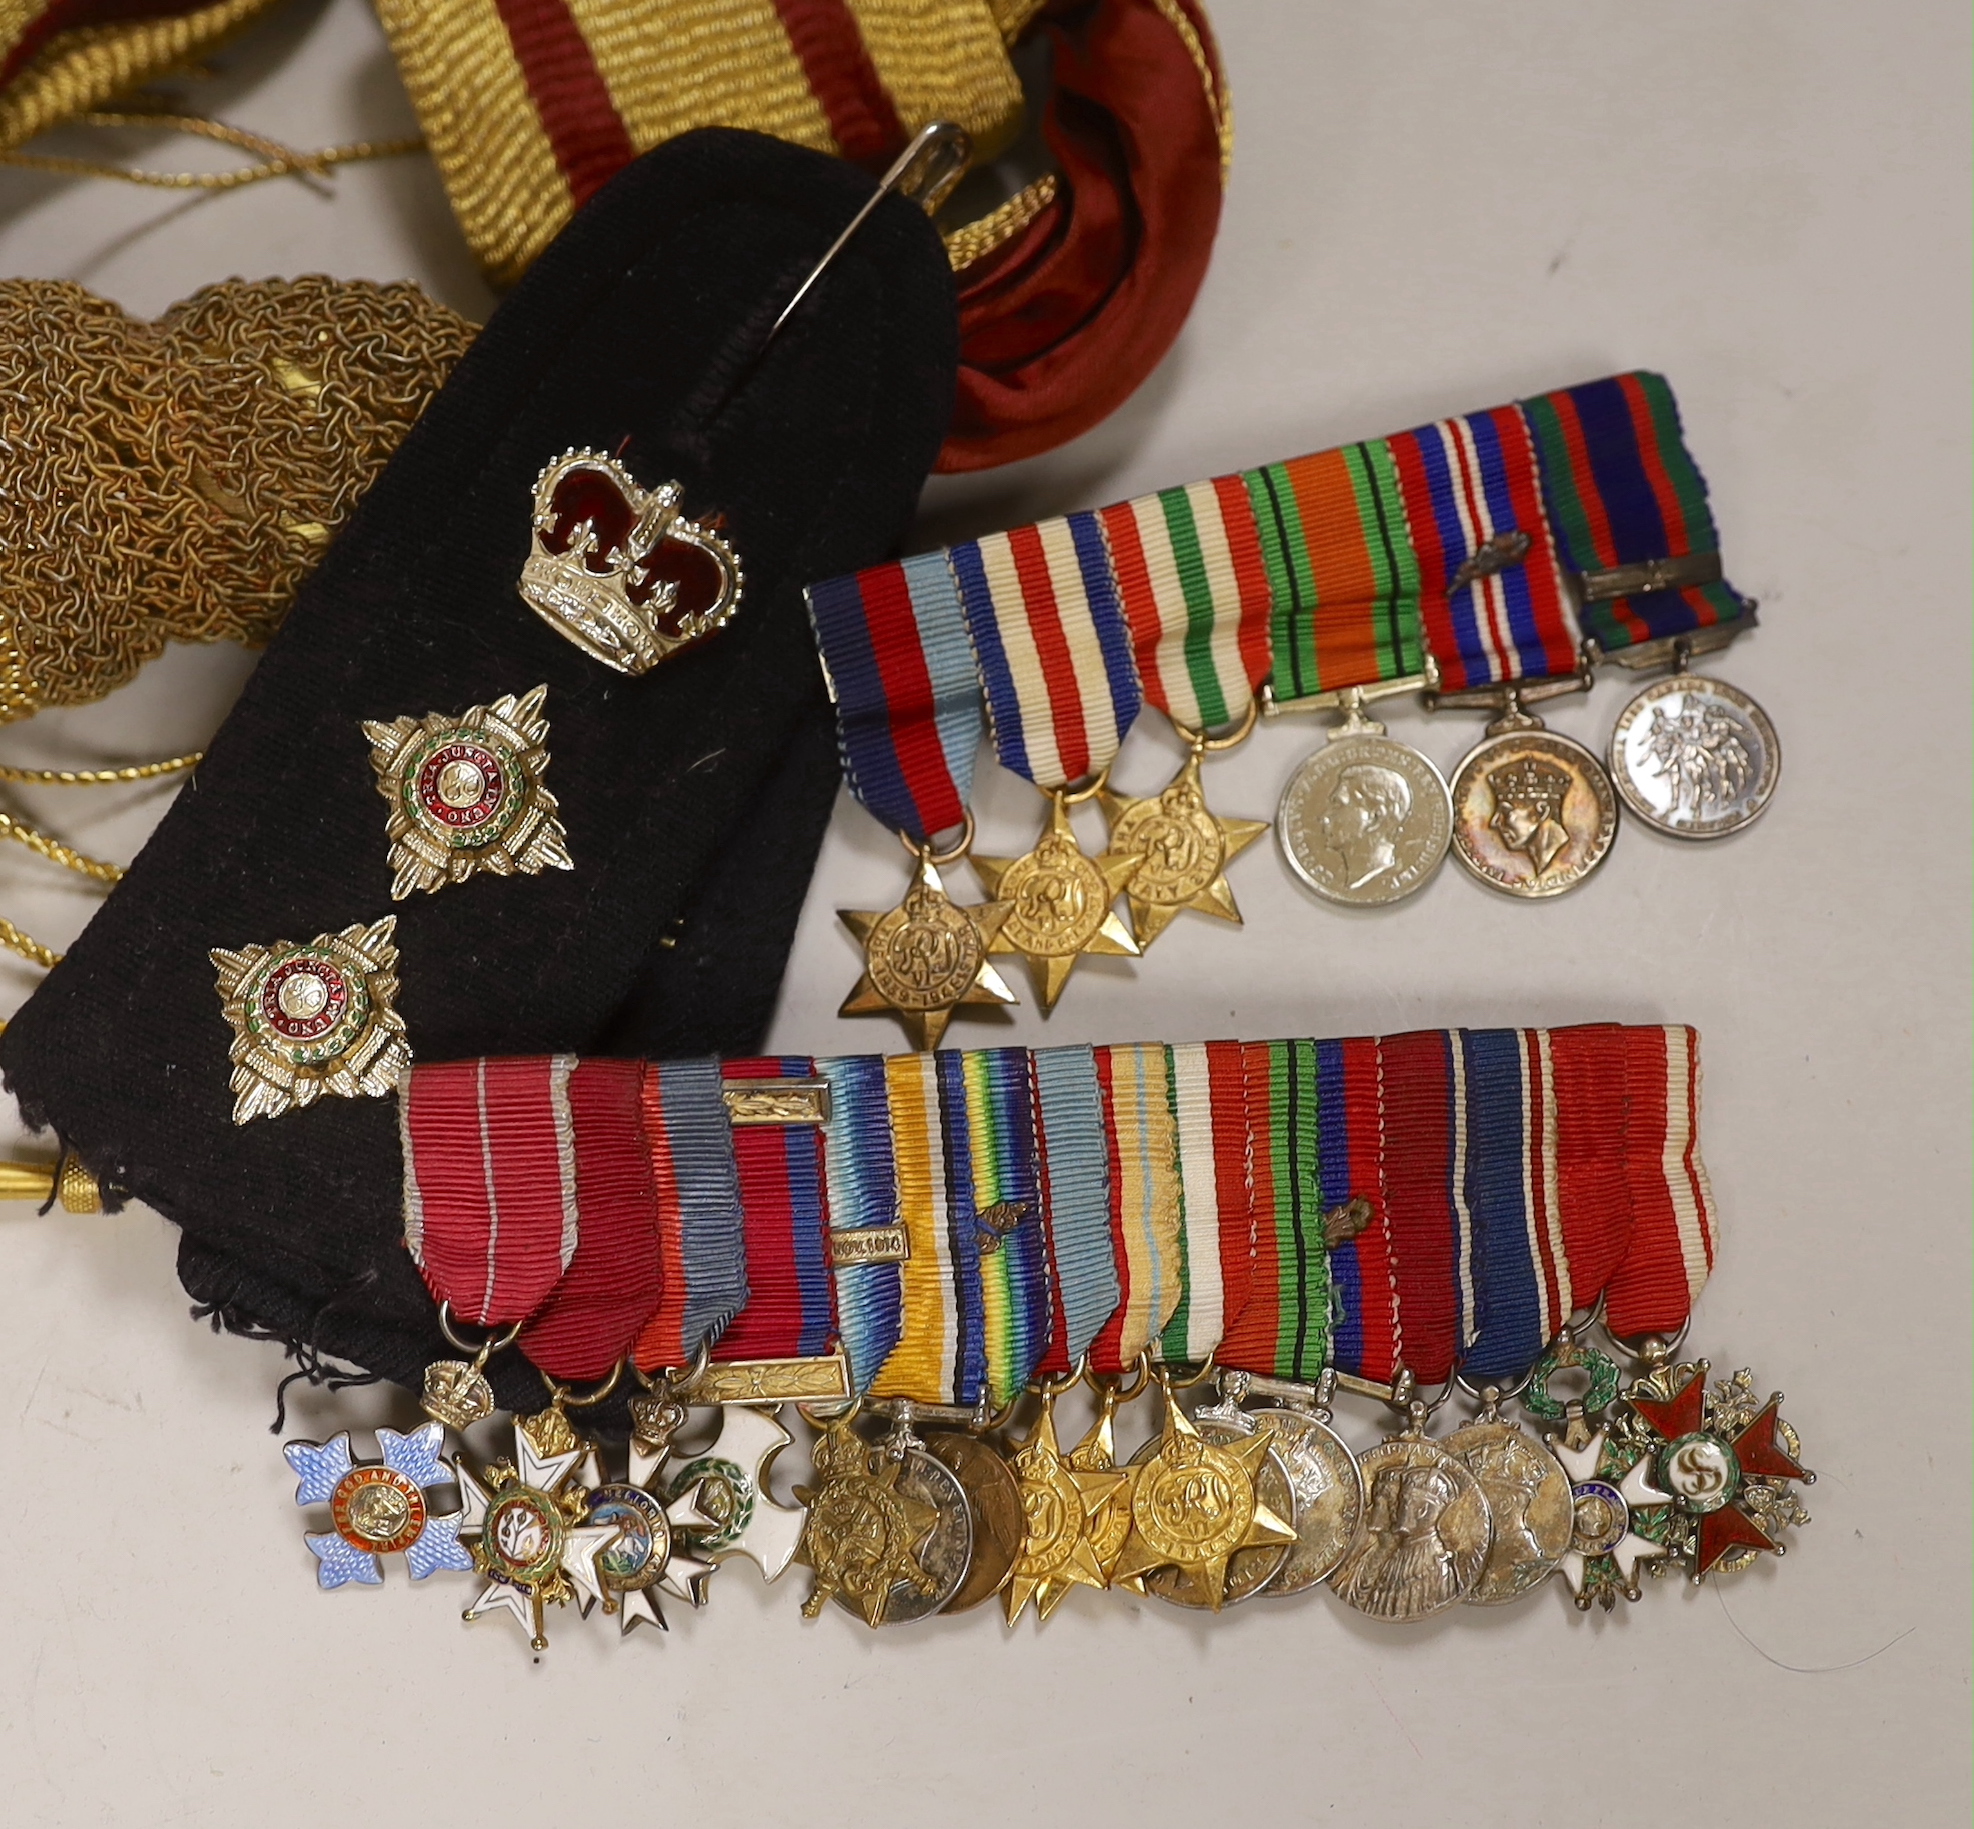 Two miniature medal groups awarded to Lt. Gen. Sir Desmond Anderson, together with his epaulets, frogging and two items of related paperwork